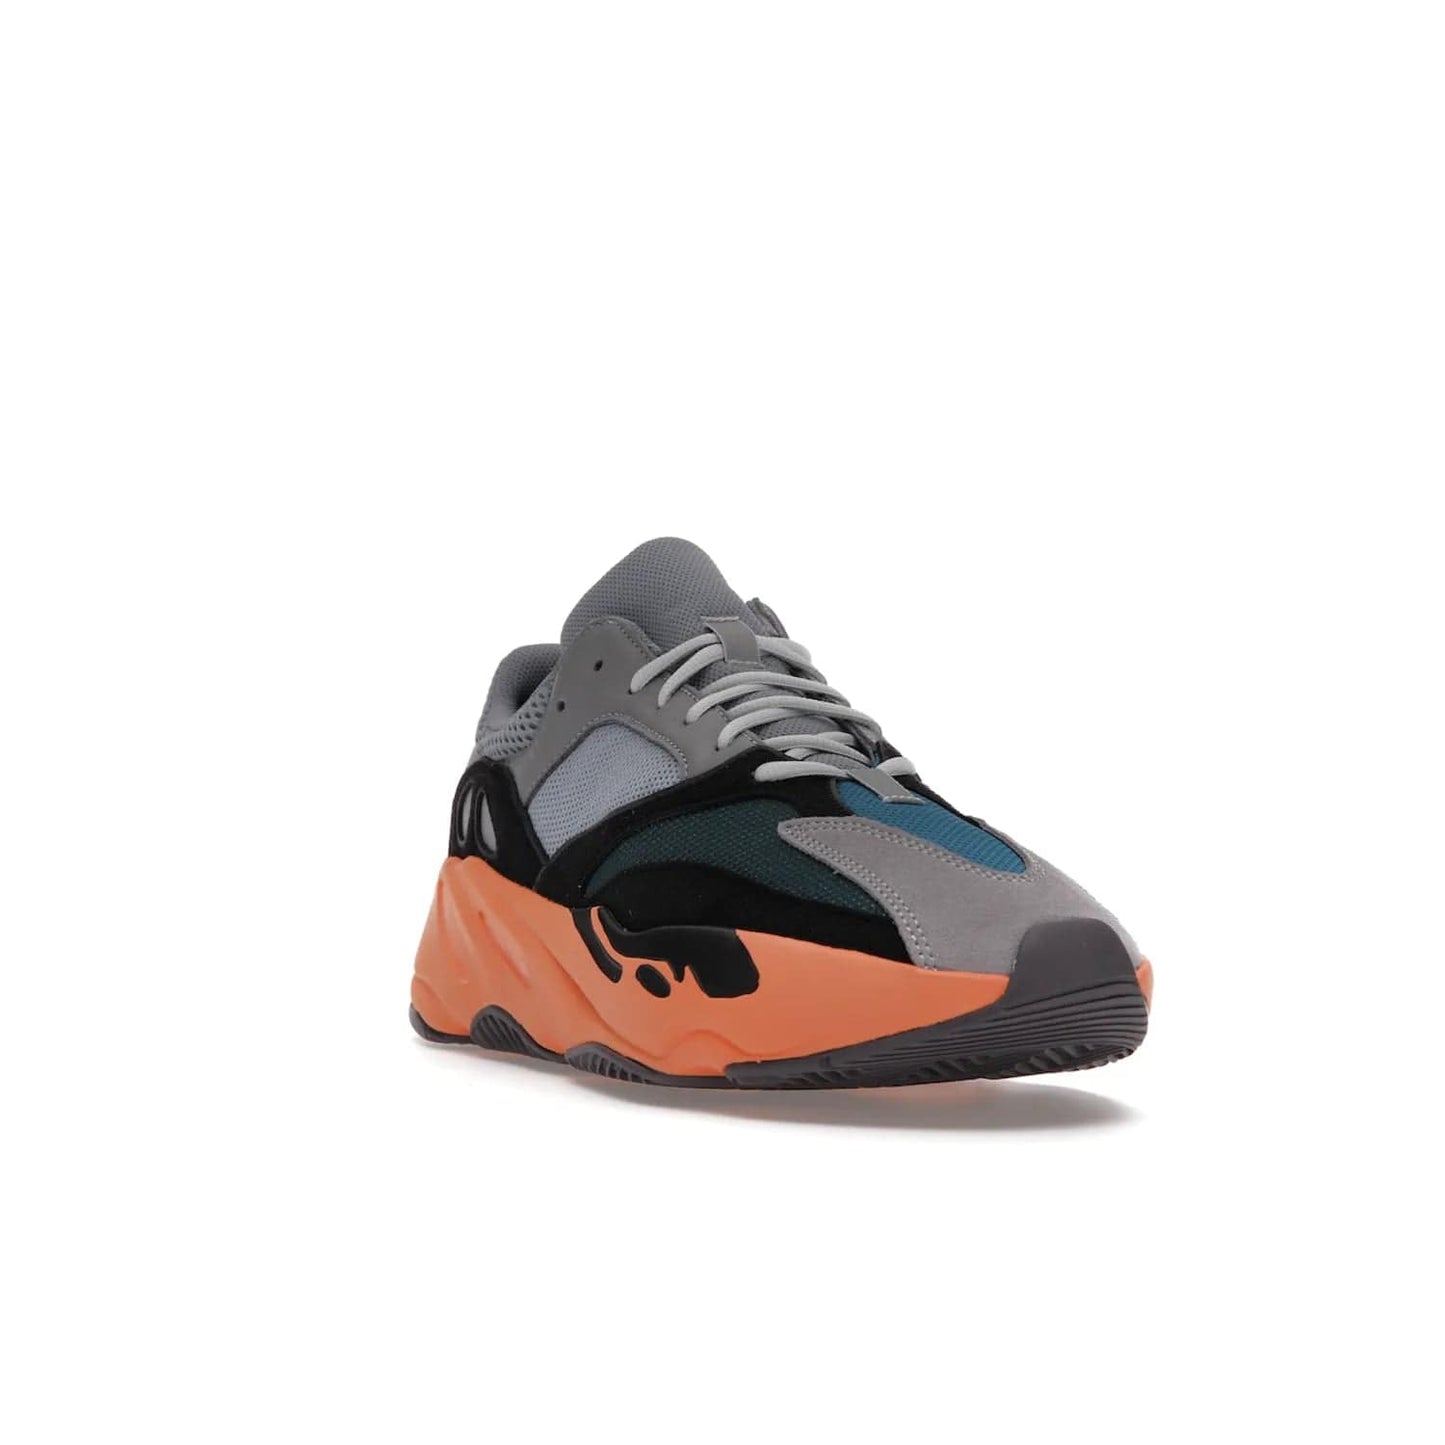 adidas Yeezy Boost 700 Wash Orange - Image 7 - Only at www.BallersClubKickz.com - Introducing the adidas Yeezy Boost 700 Wash Orange. Unique grey leather, suede, mesh upper and teal panels with a chunky Wash Orange Boost midsole. Release October 2021, make a statement today!